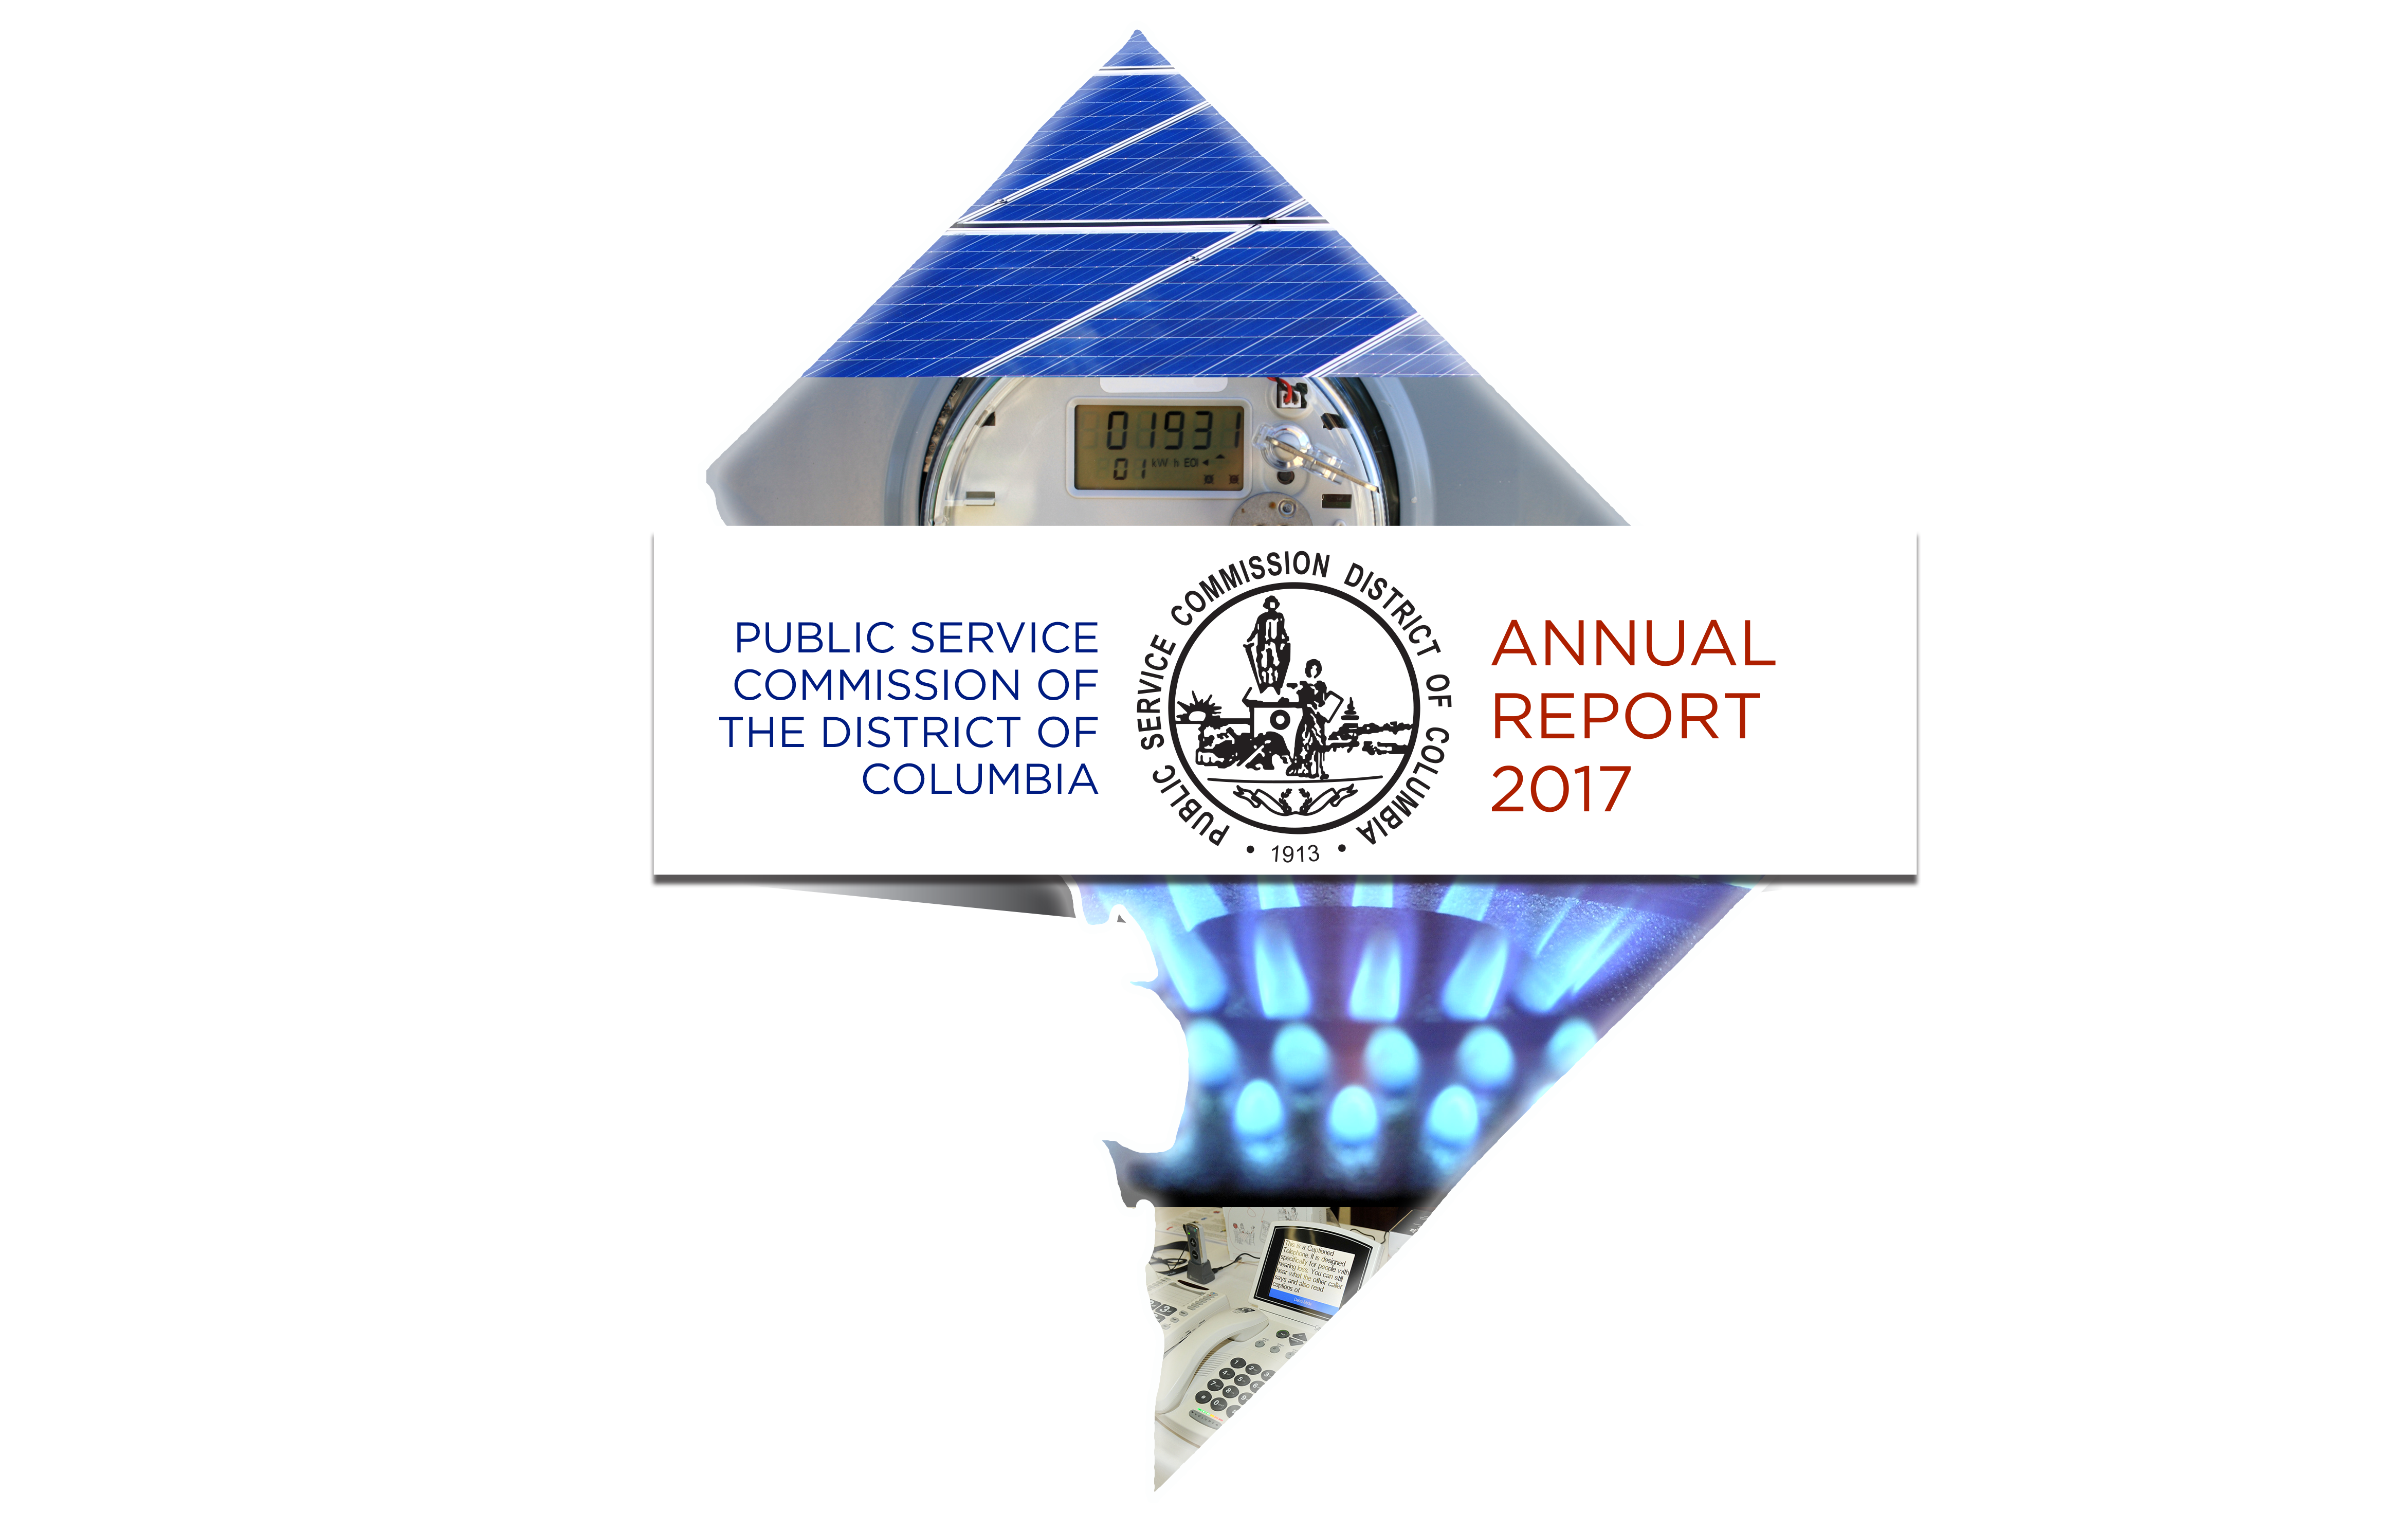 DISTRICT OF COLUMBIA PUBLIC SERVICE COMMISSION ANNUAL REPORT 2017